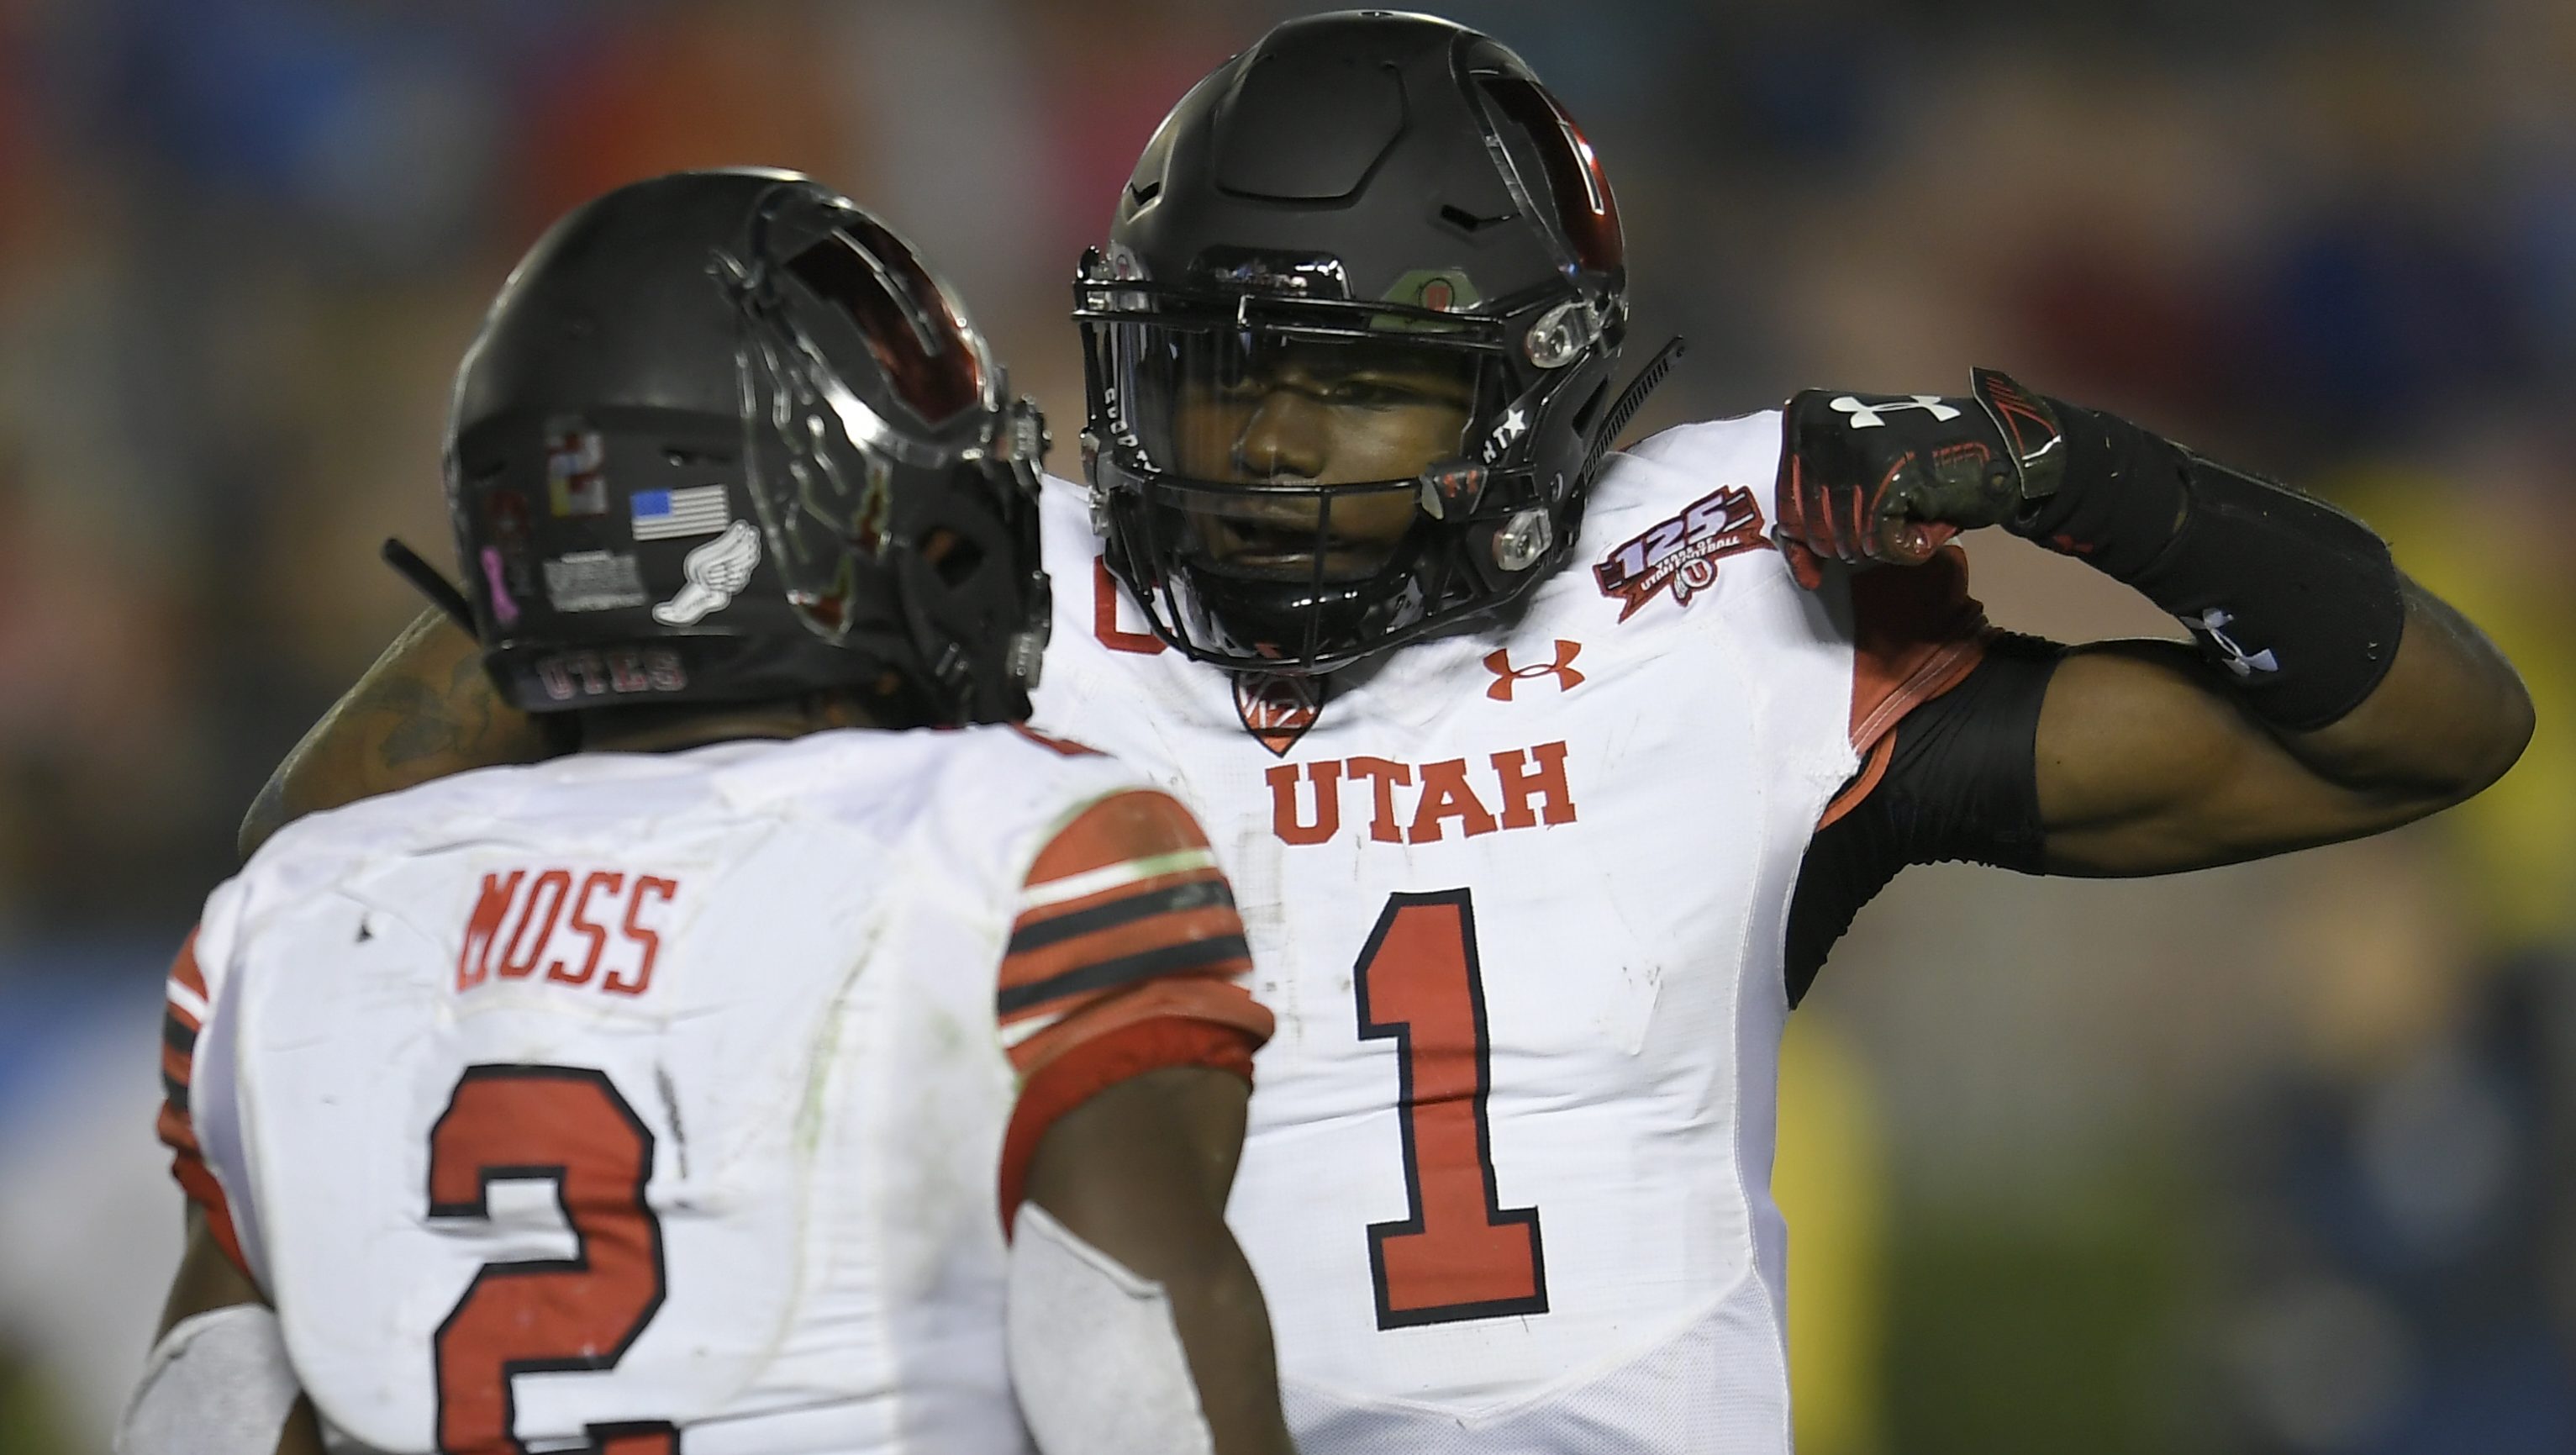 Utah Playoff What Happens With Loss to Oregon?